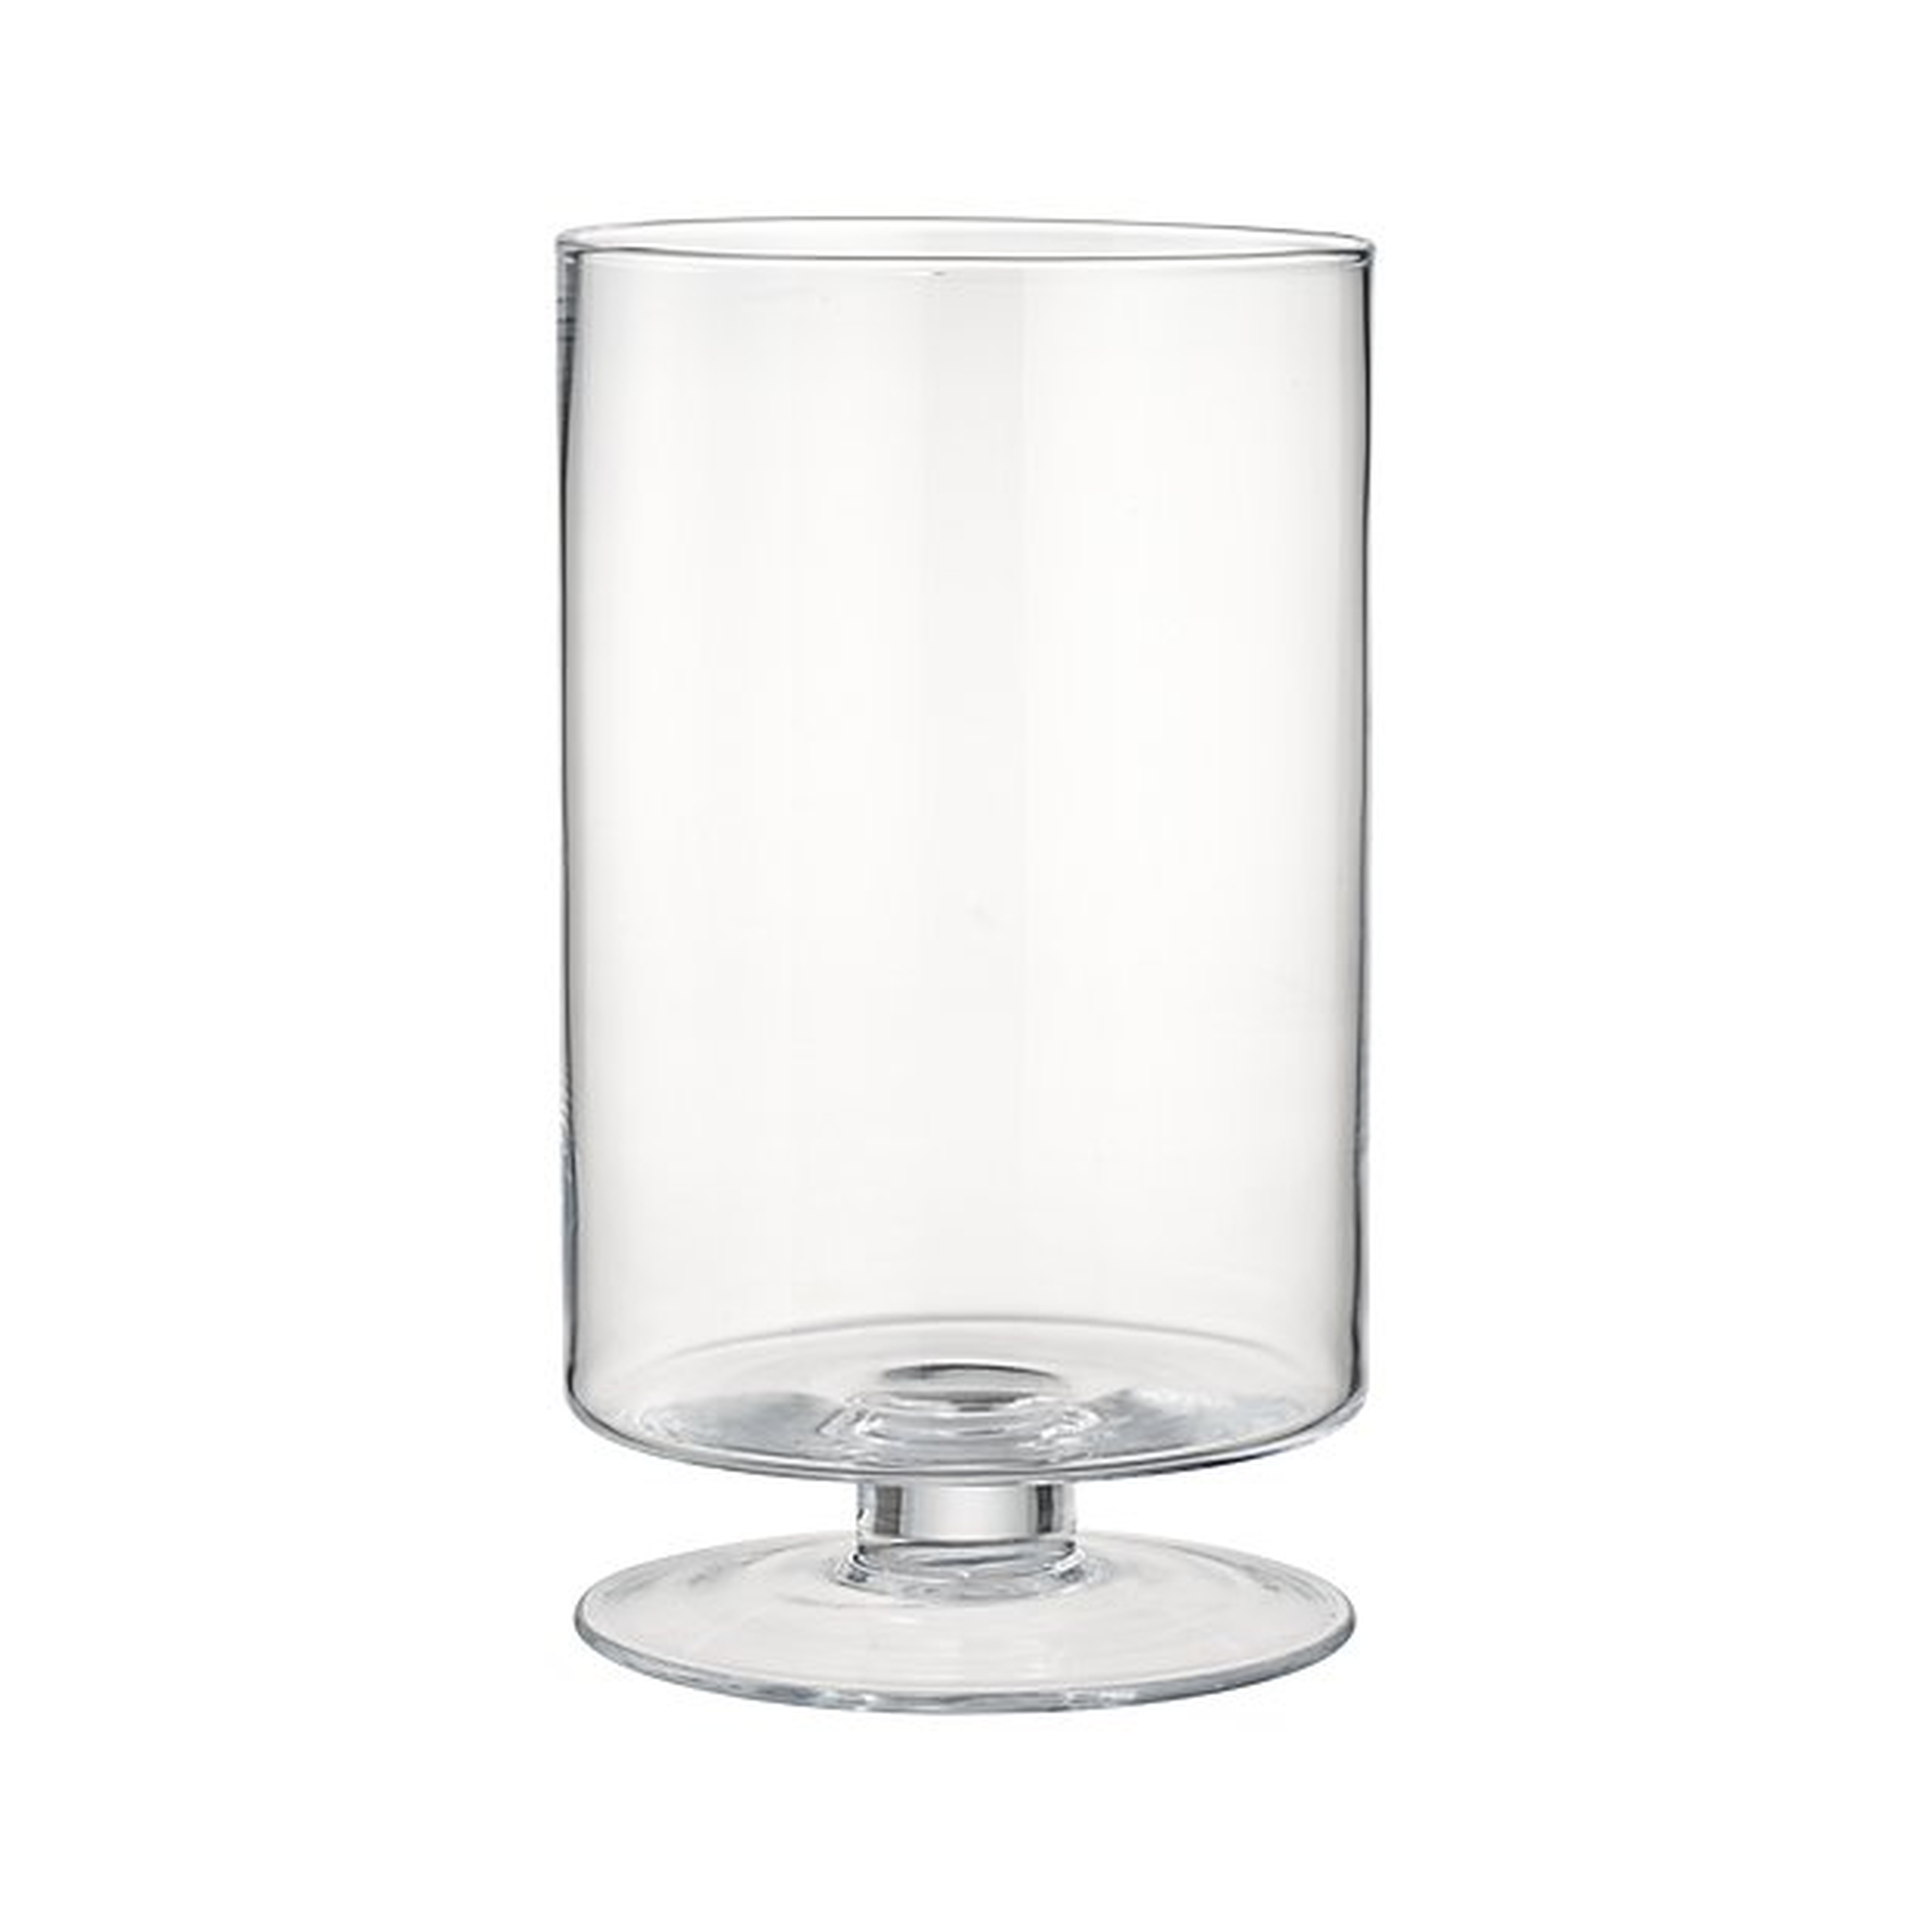 London Small Glass Hurricane Candle Holder Small - Crate and Barrel